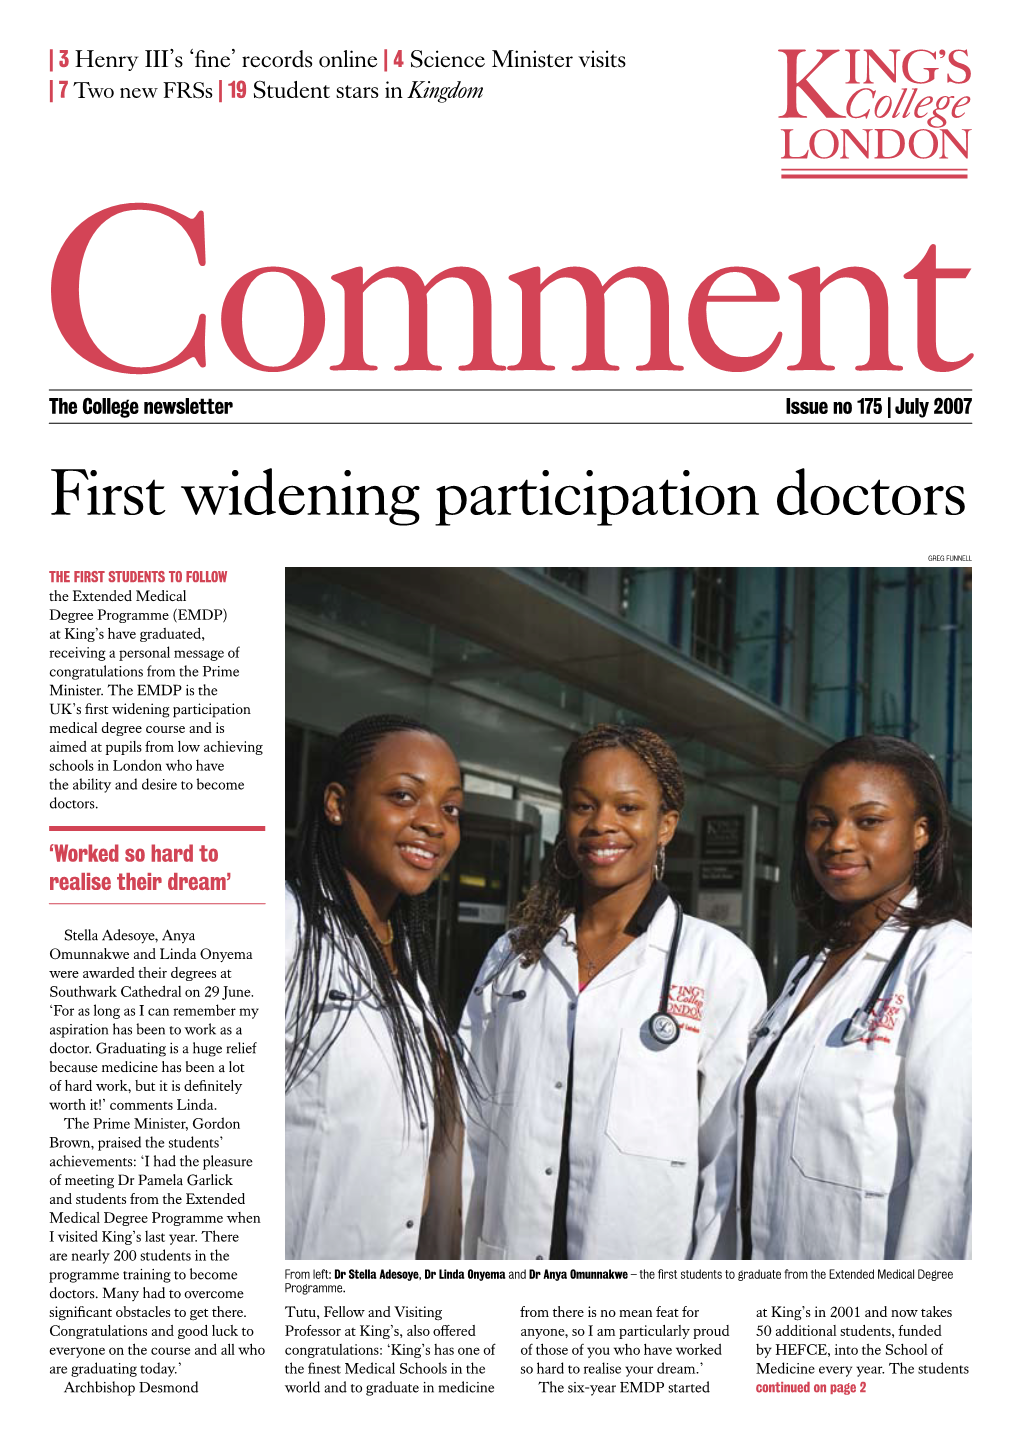 First Widening Participation Doctors